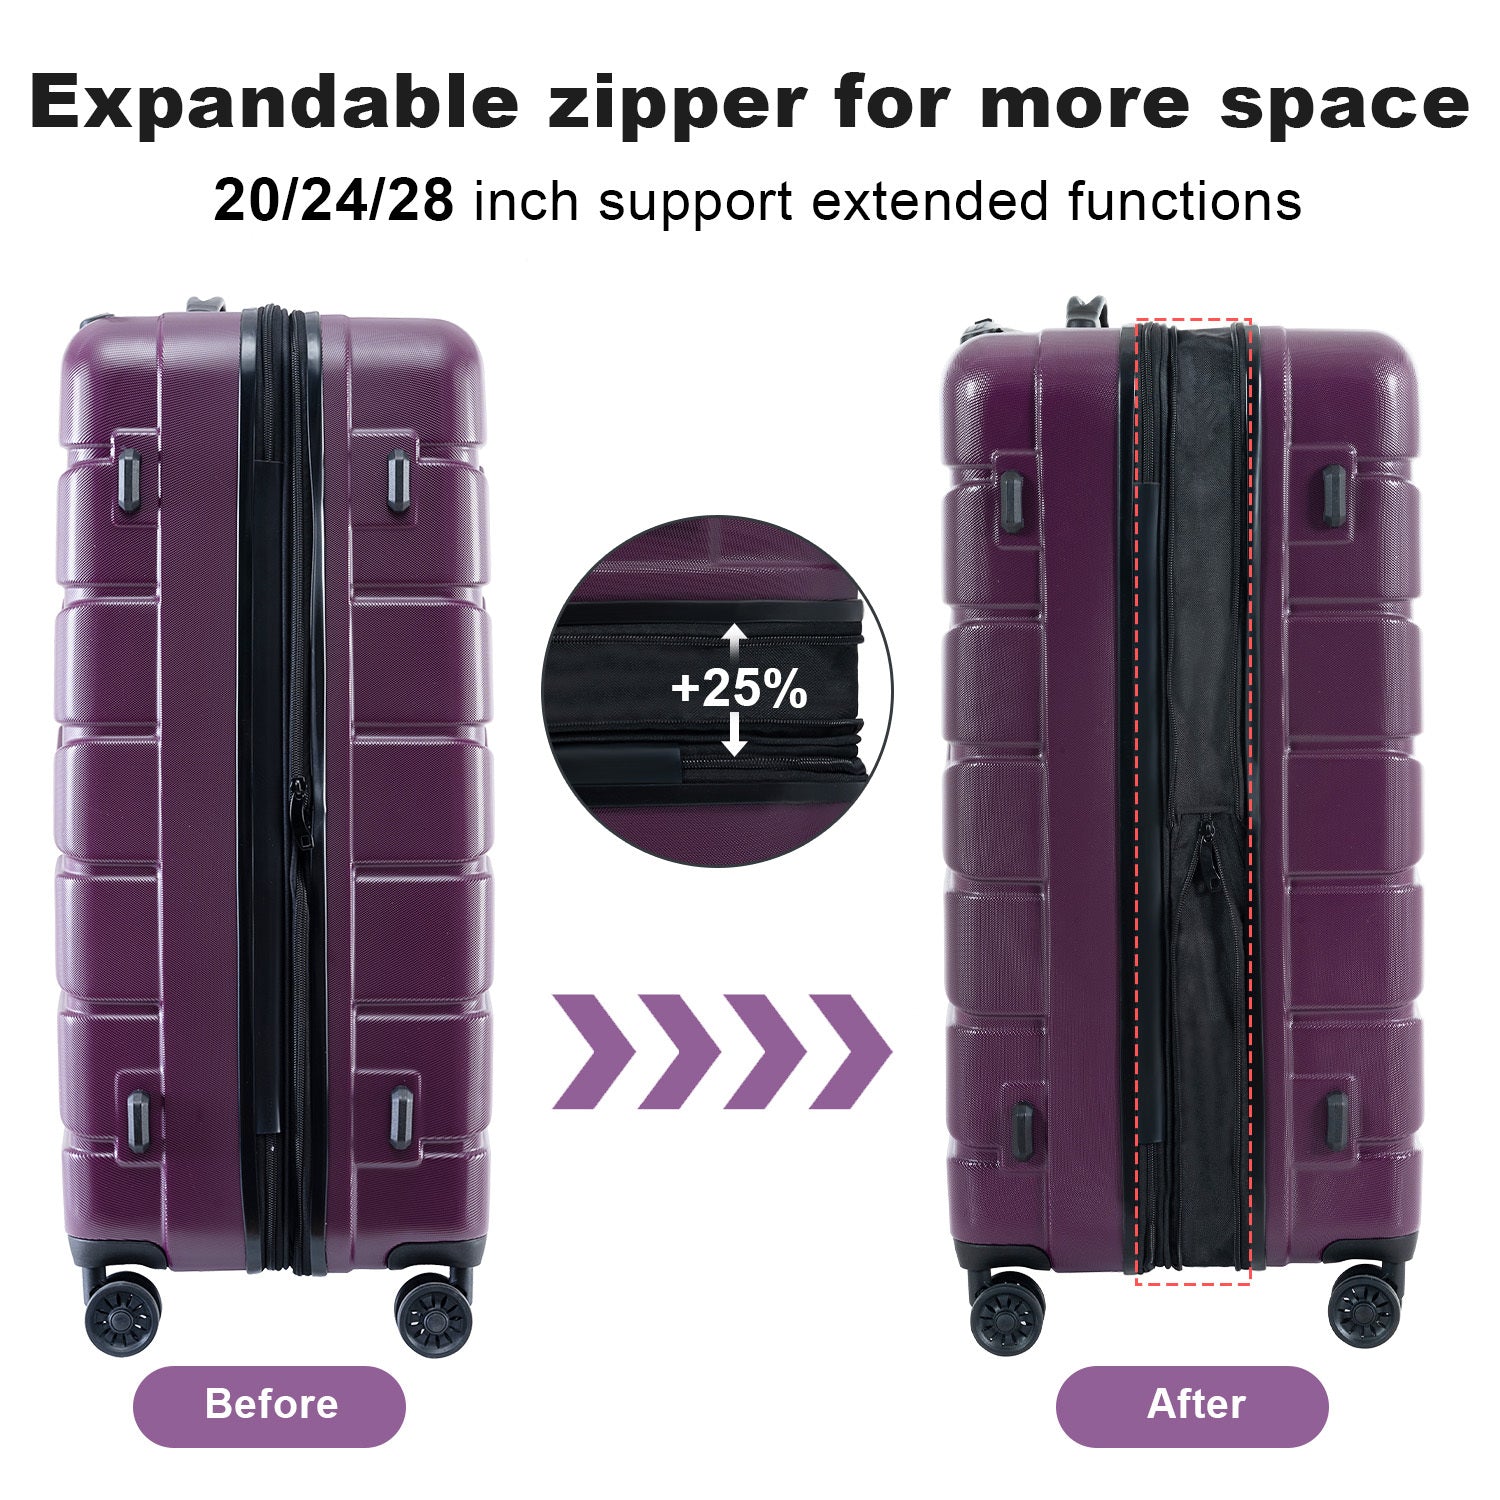 Luggage Sets Model Expandable ABS PC 3 Piece Sets with purple-abs+pc